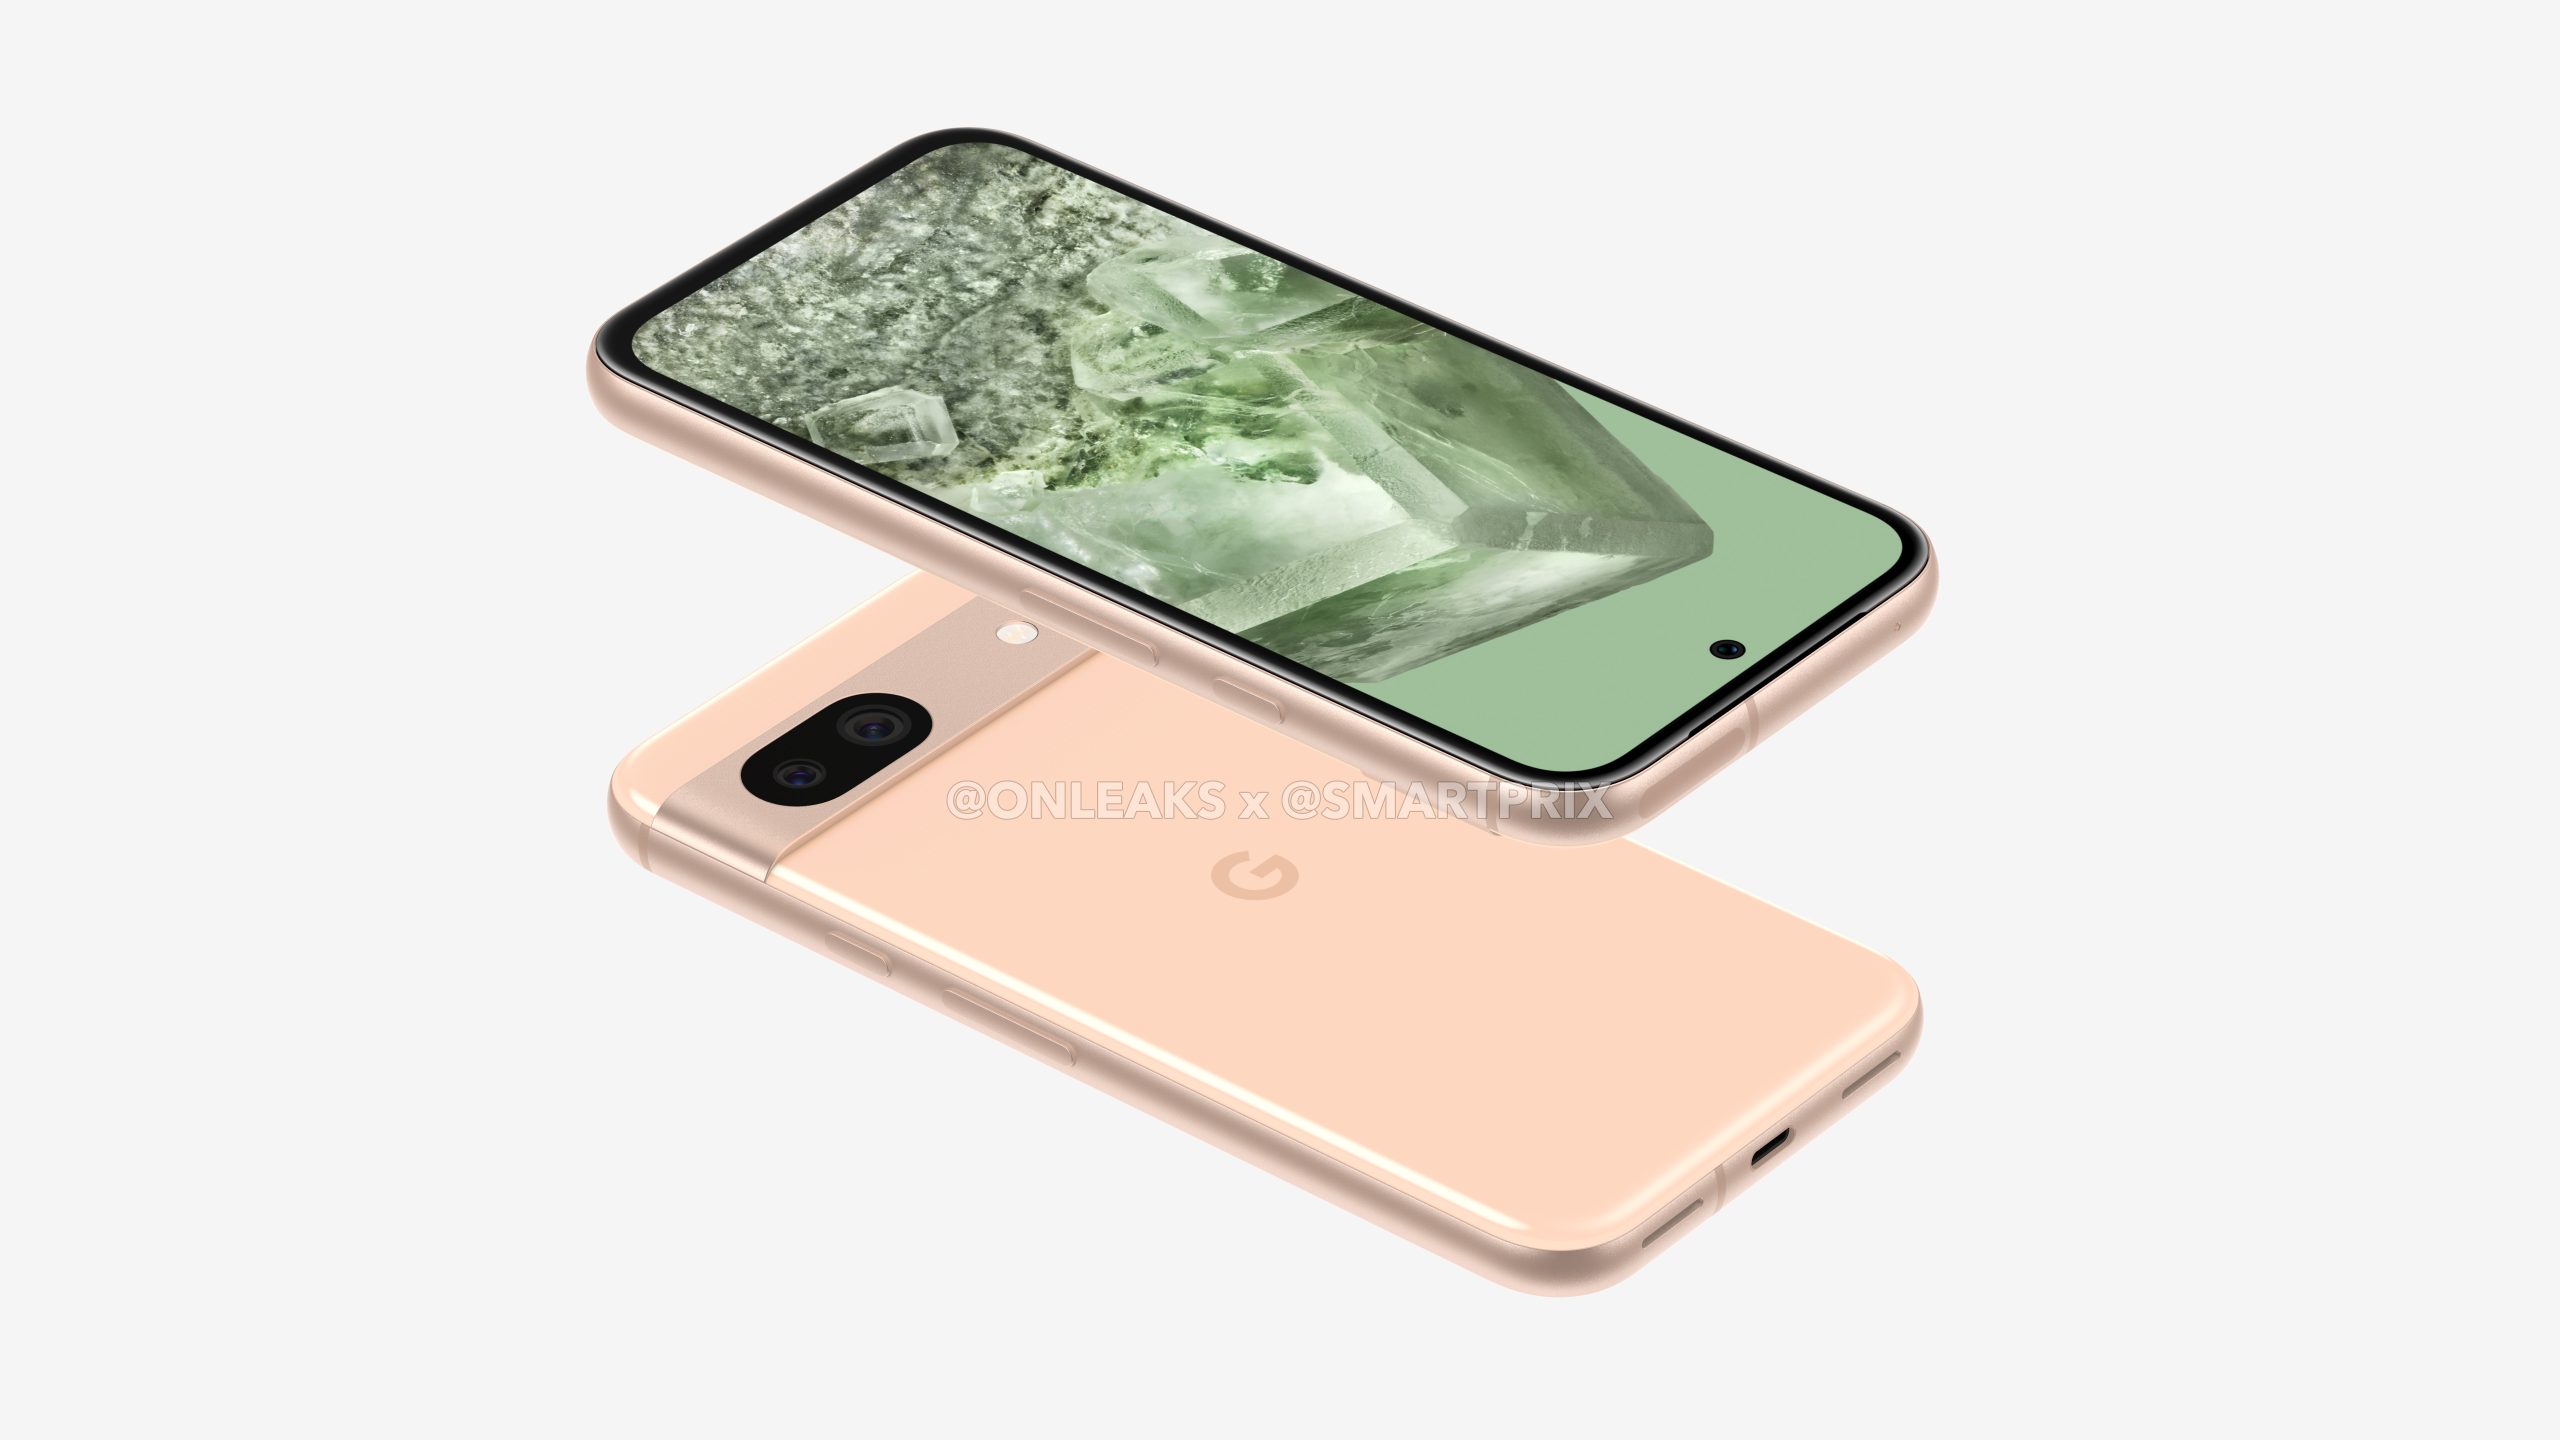 The Pixel 8a will get a 256GB version and a higher price than its predecessor, reports say